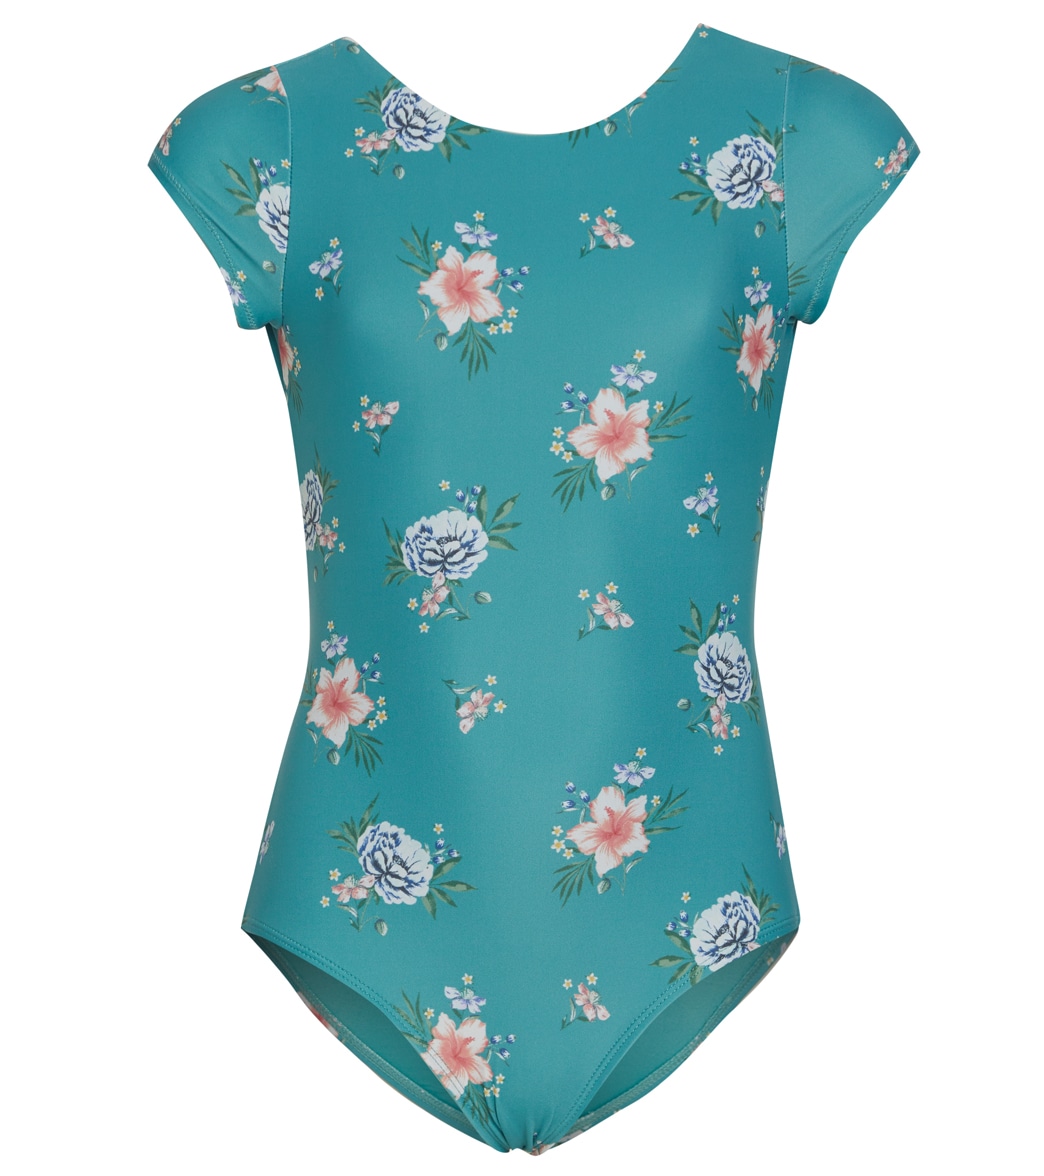 O'neill Girls' Chan Floral Short Sleeve Tie Back One Piece Swimsuit - Teal 6 - Swimoutlet.com